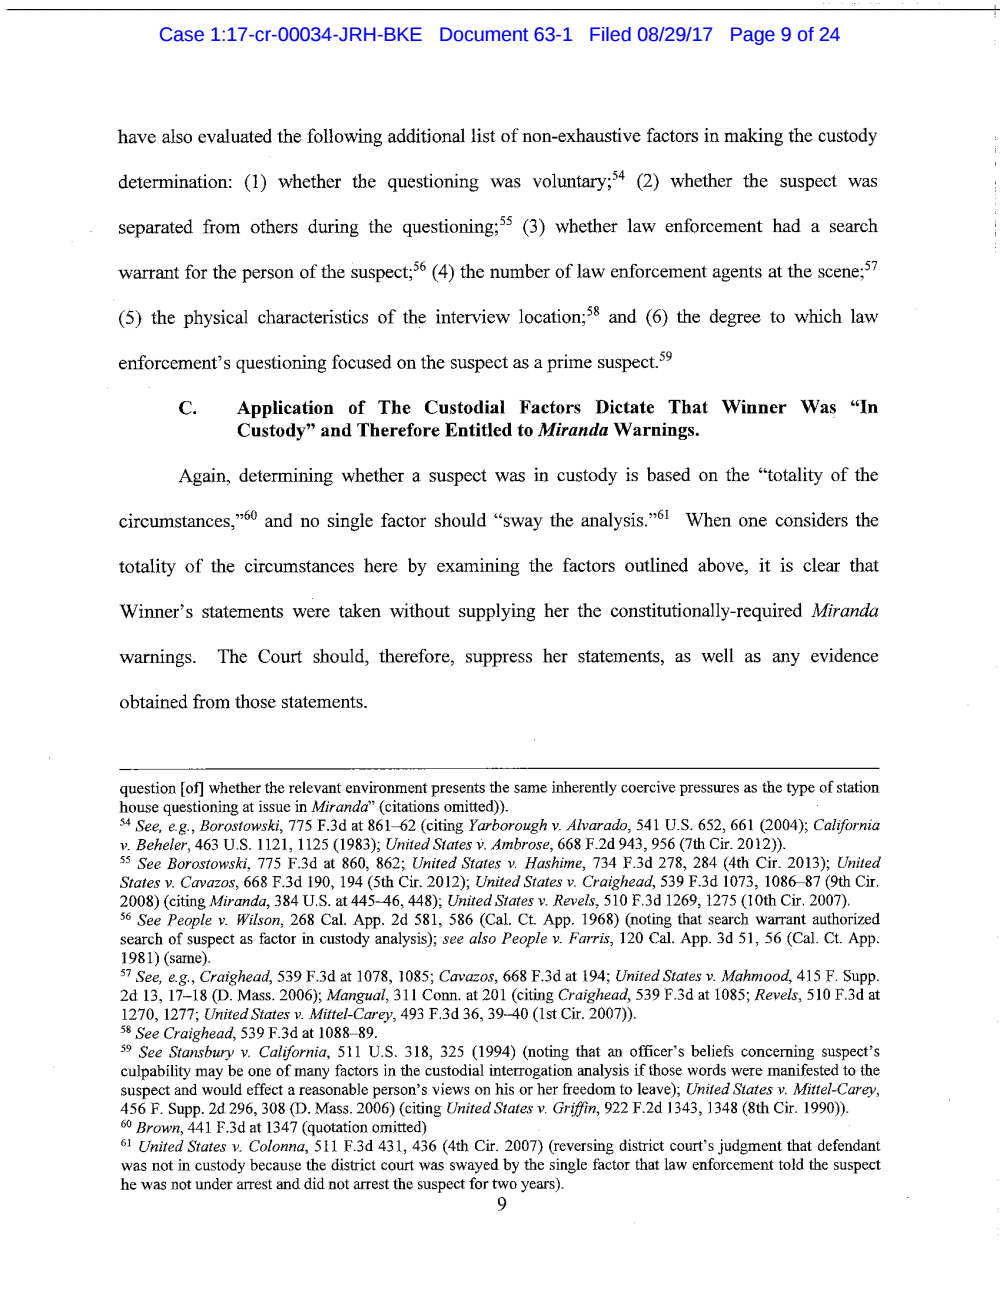 Page 9 from Reality Winner Memo in Support of Motion to Suppress